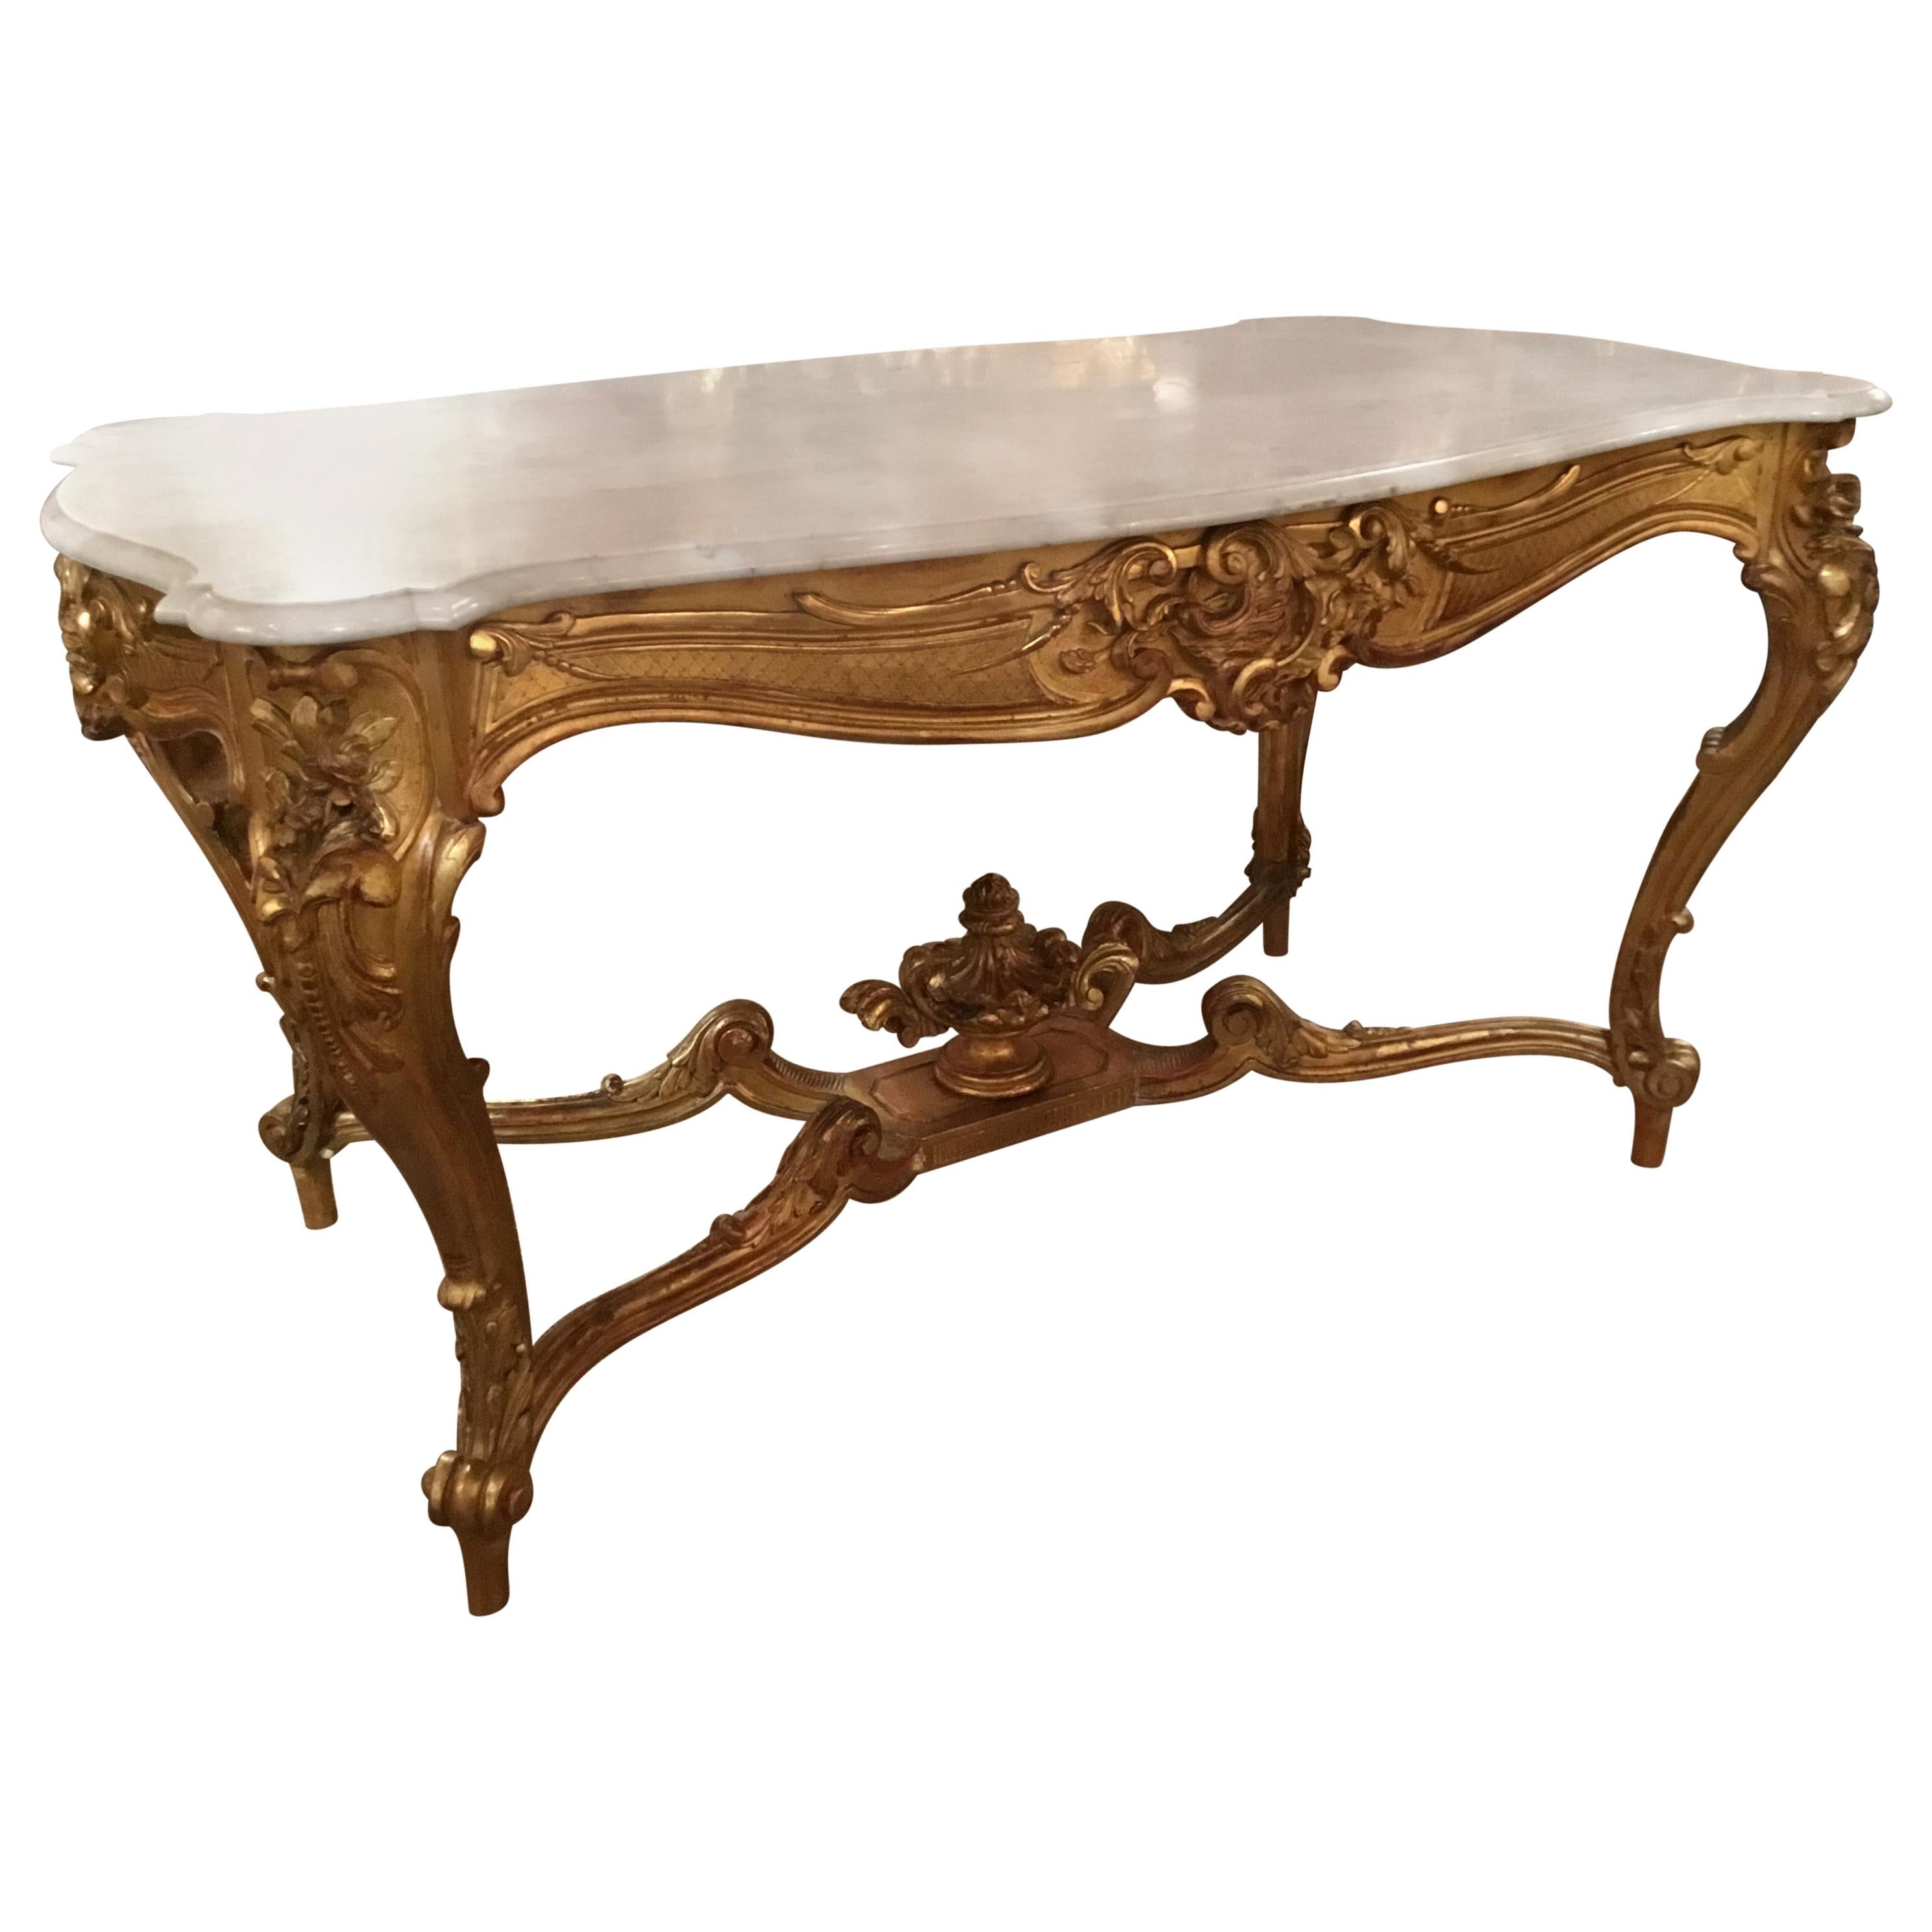 Louis XV Style Giltwood and white Marble-Top Center Table with Foliate Garlands